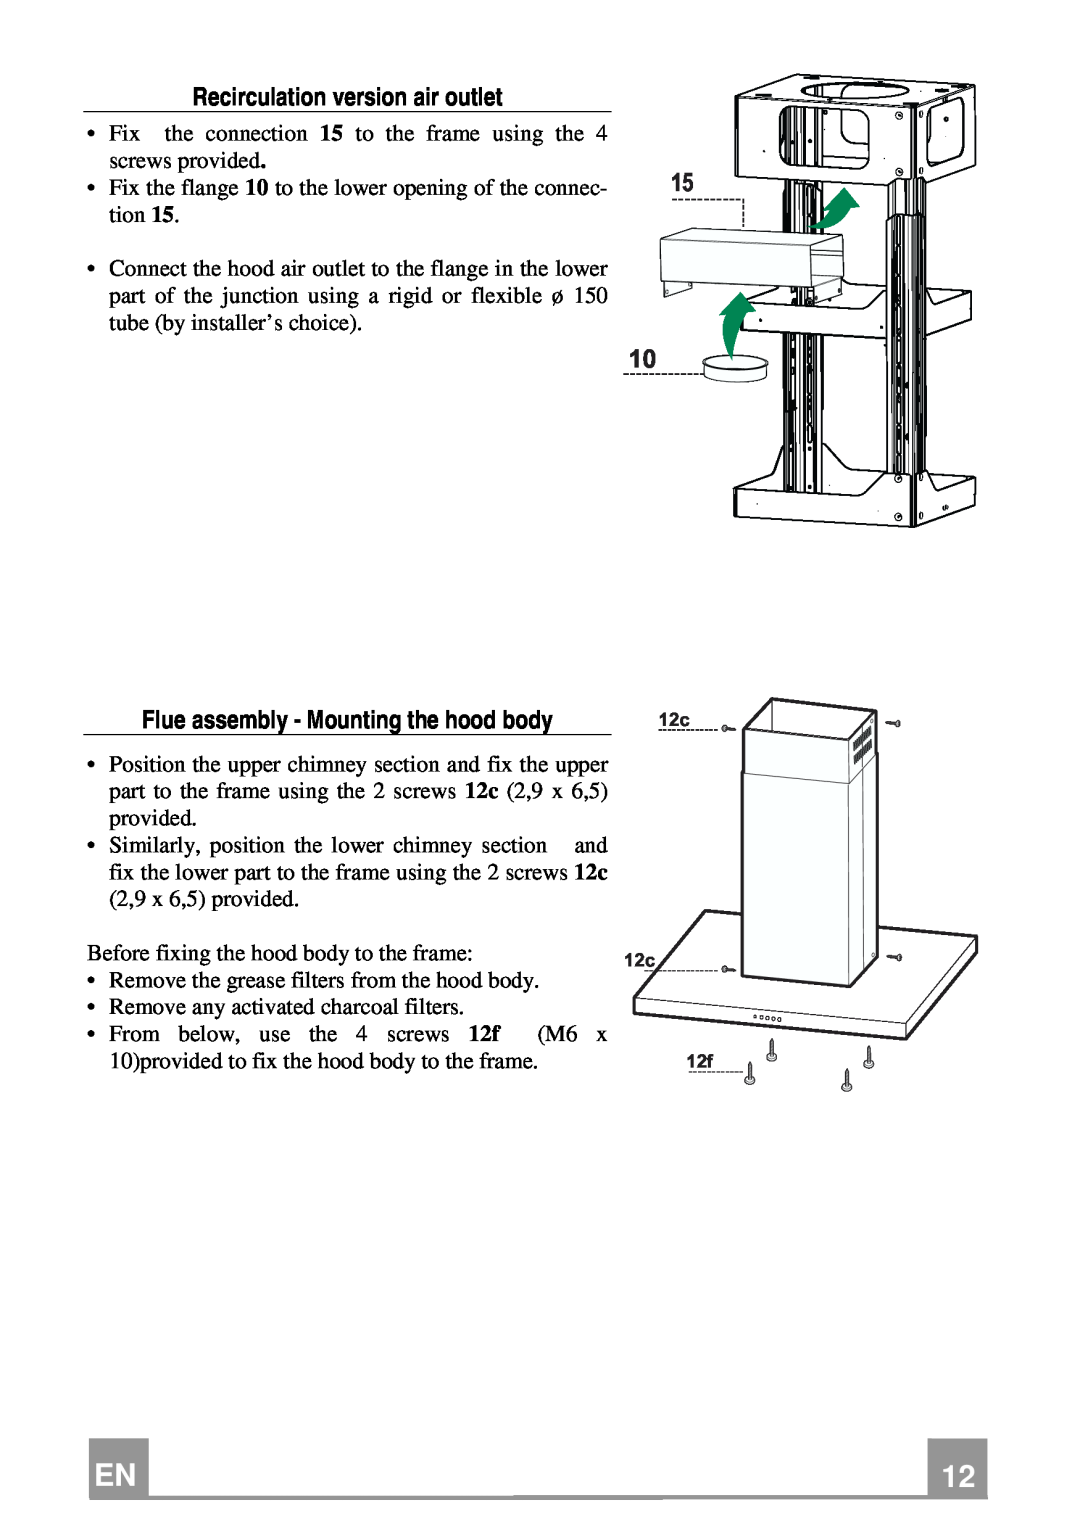 Franke Consumer Products FDF 9044 I XS ECS manual Recirculation version air outlet, Flue assembly - Mounting the hood body 